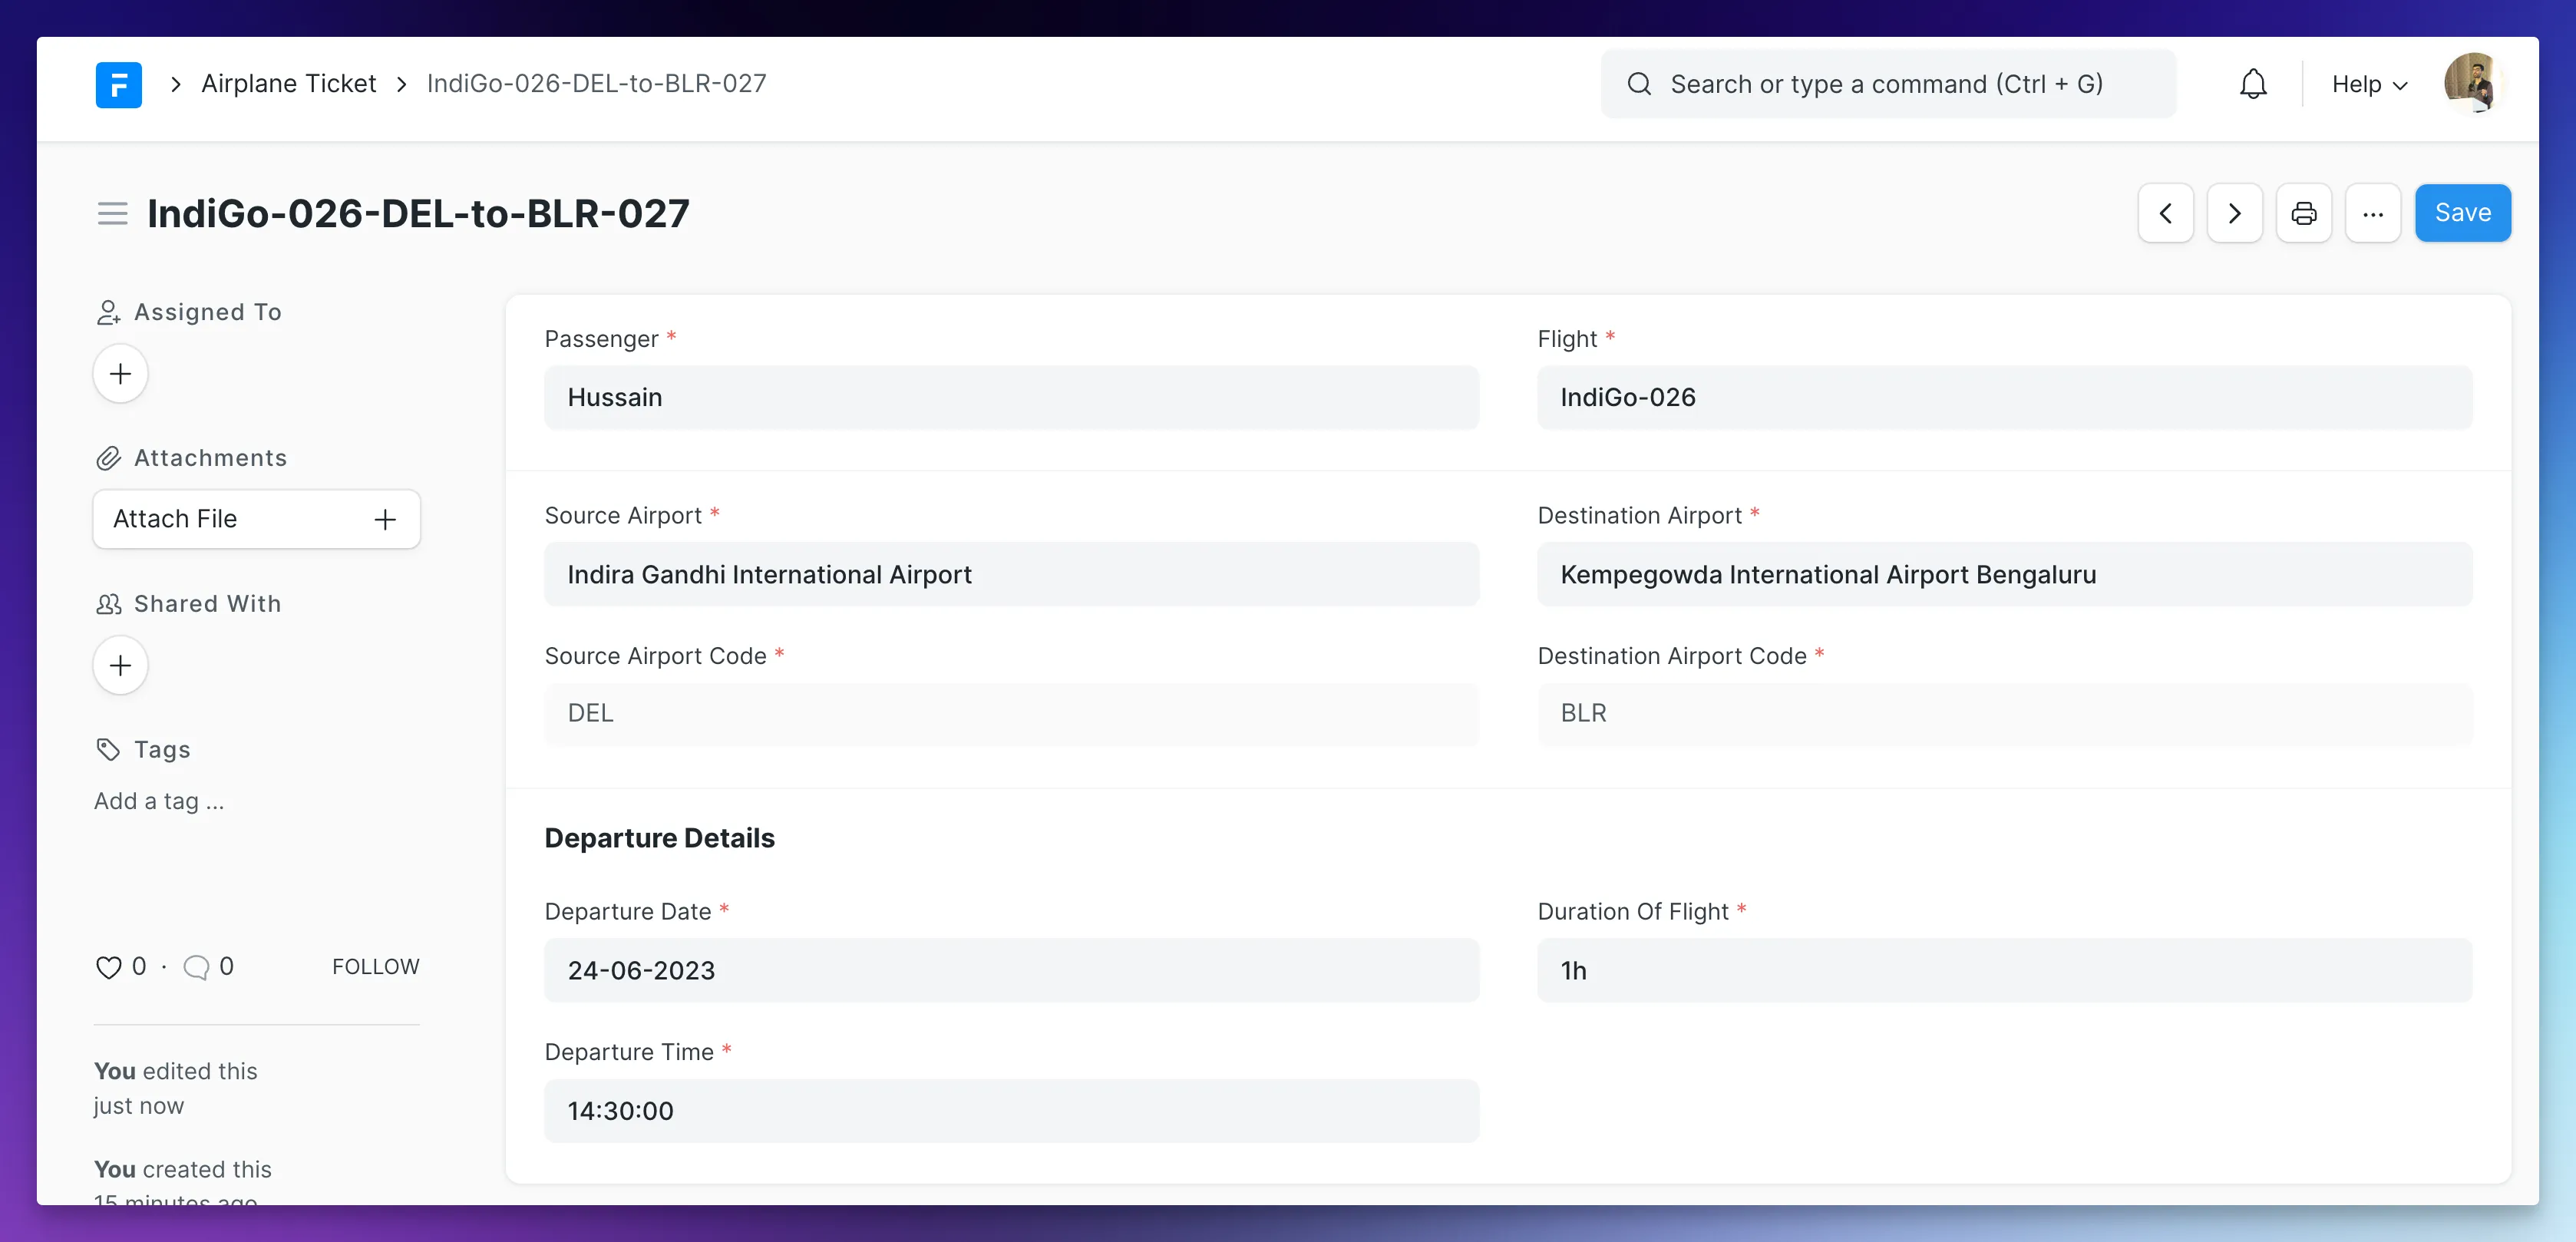 Airplane Ticket Form View